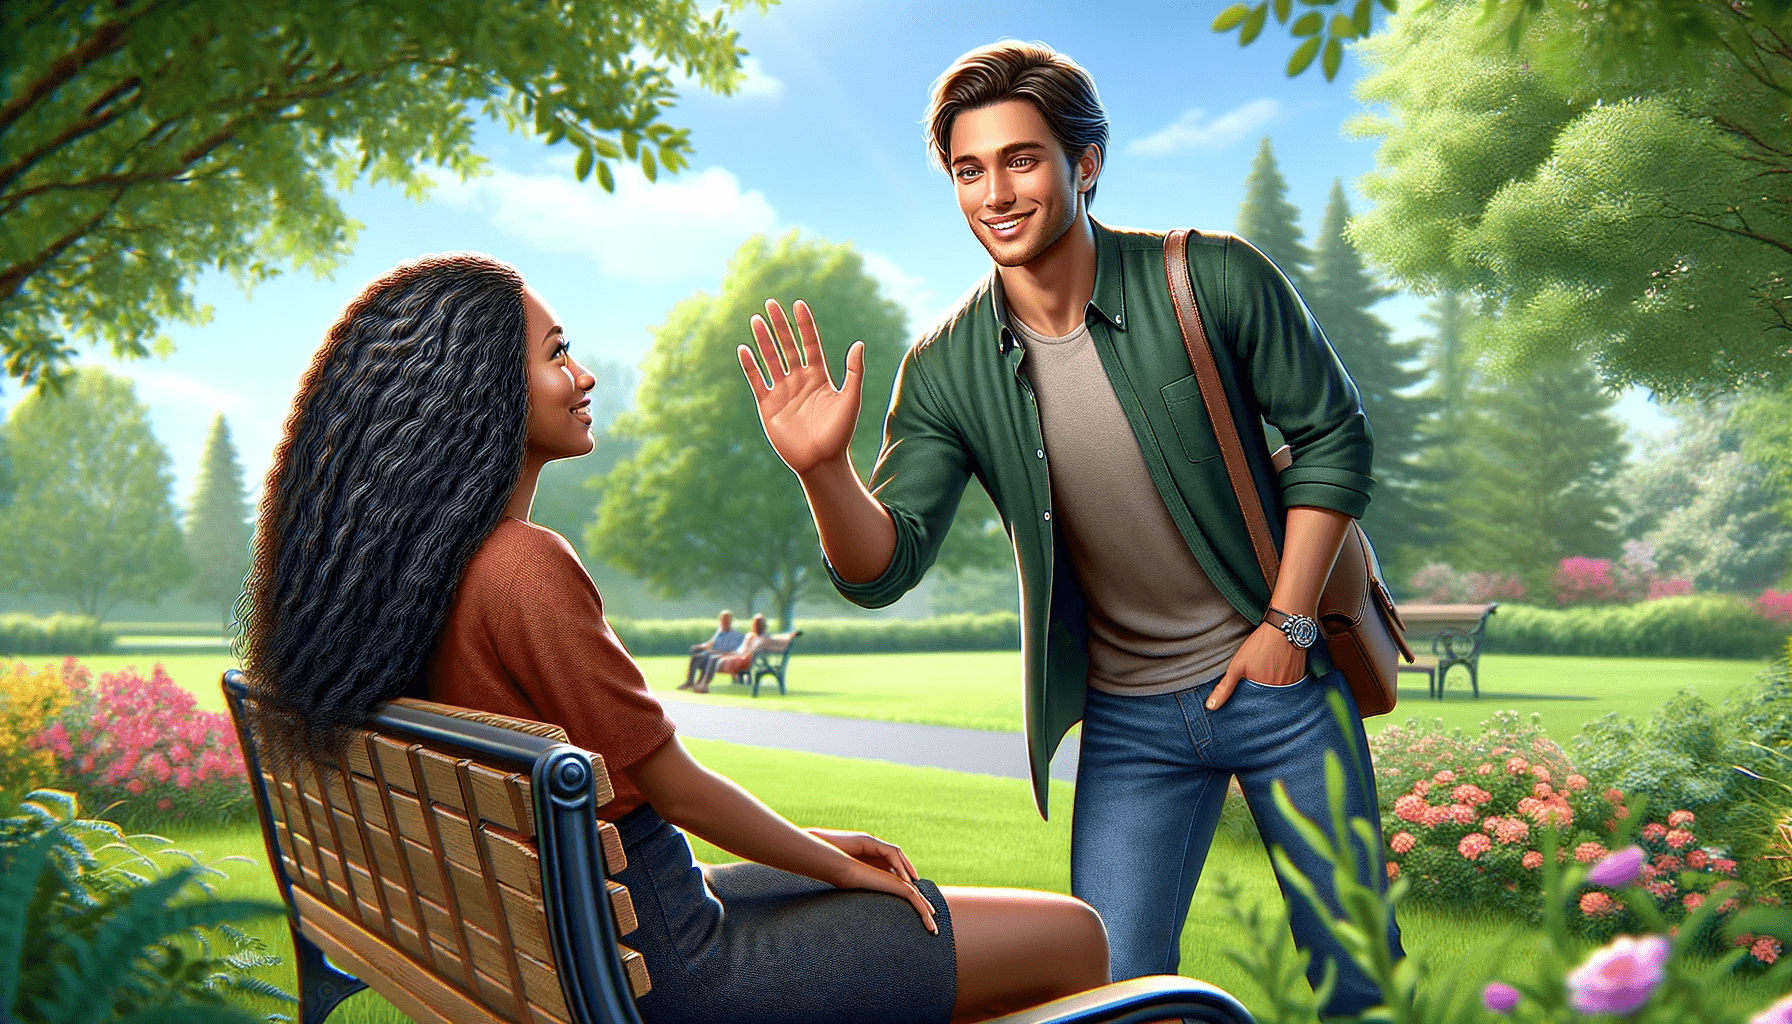 a young man in his 20s Caucasian greeting a young woman in her 20s Black in a park. The man is waving and smiling